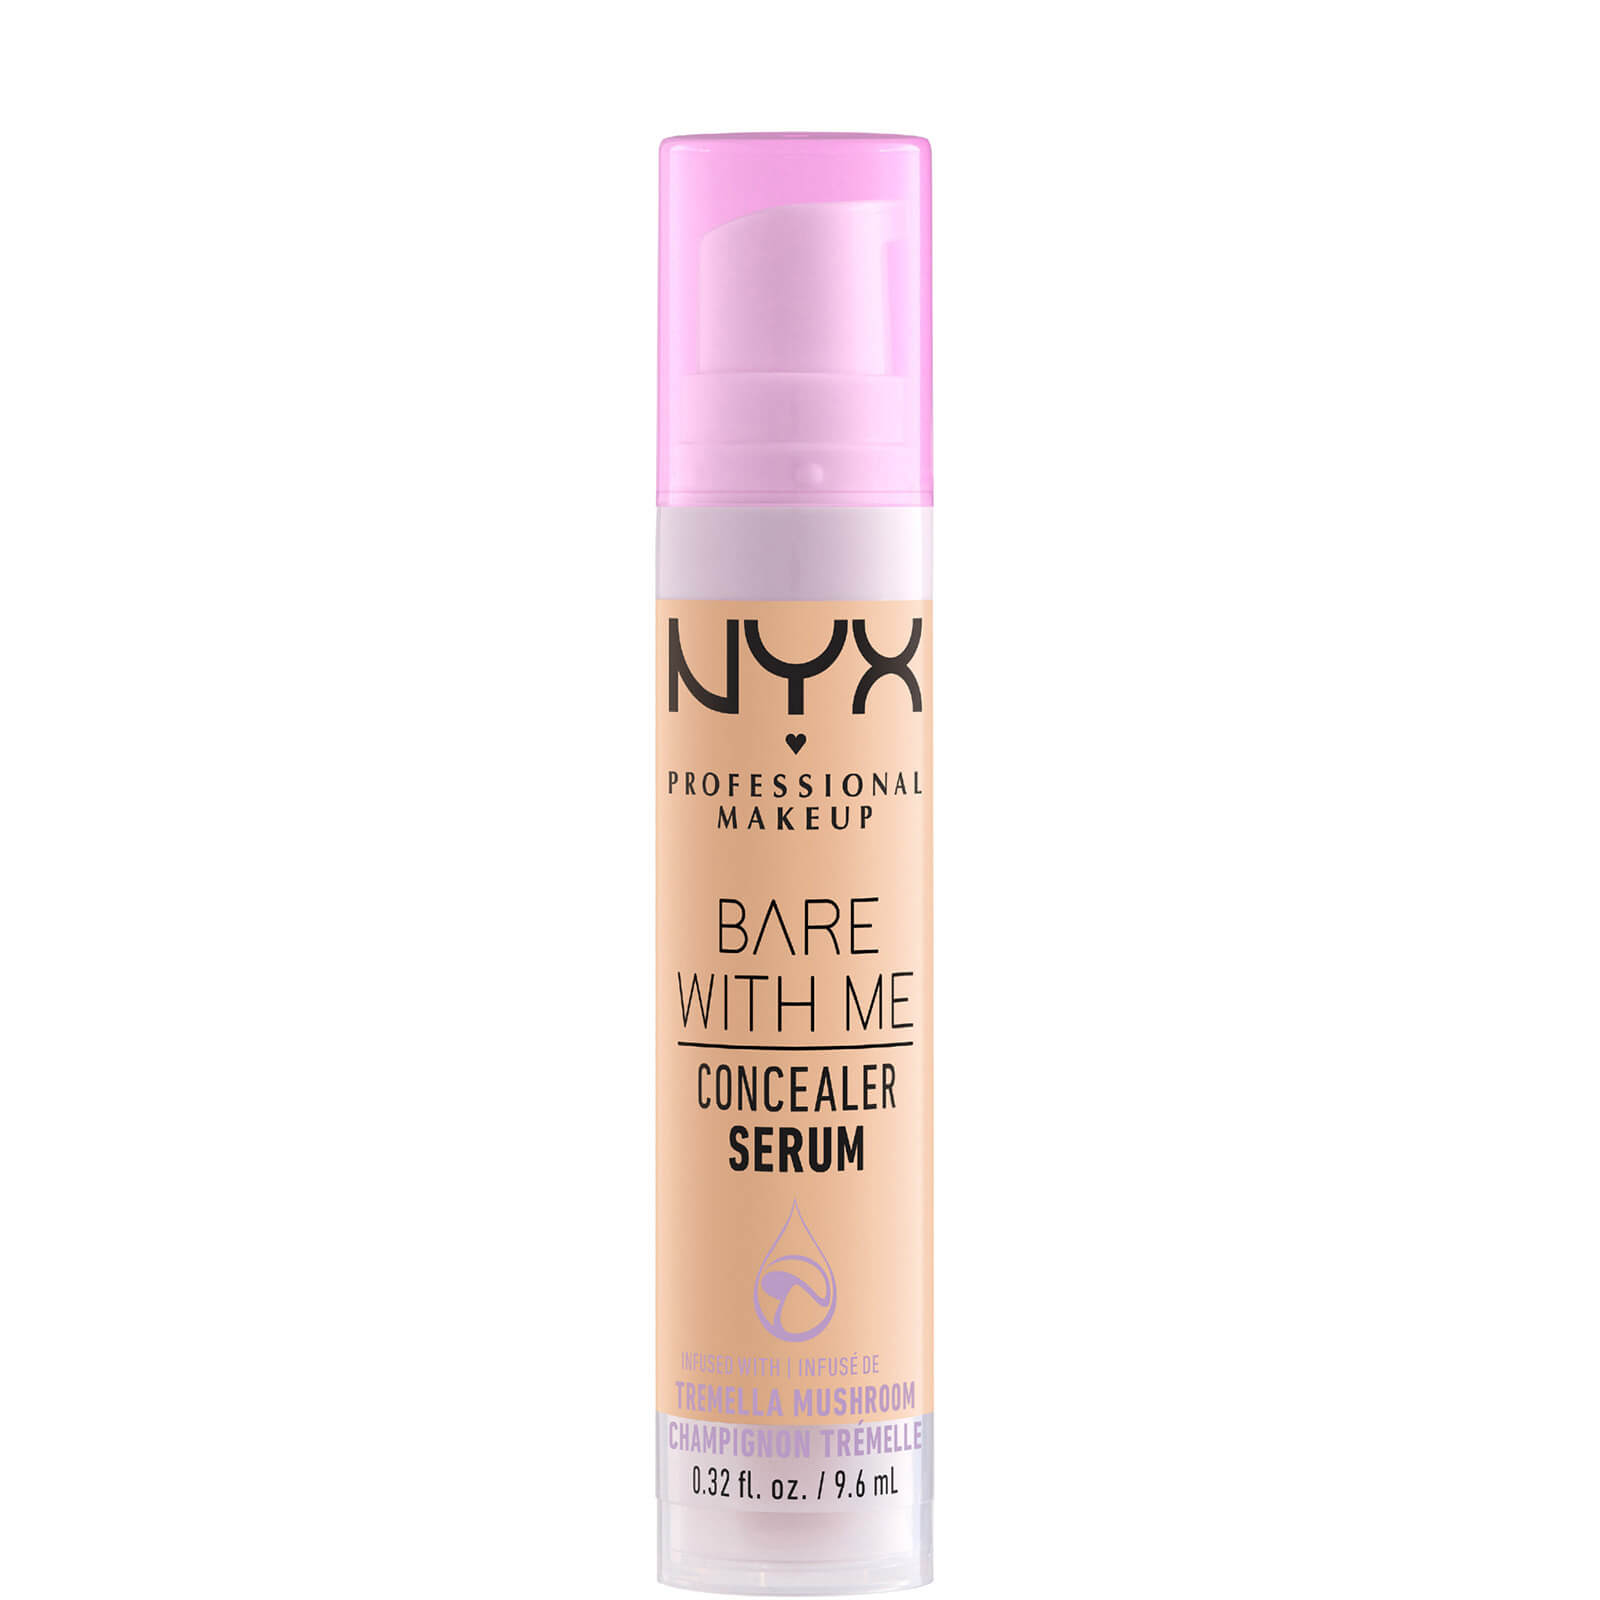 Image of NYX Professional Makeup Bare With Me Concealer Serum 9.6ml (Various Shades) - Beige